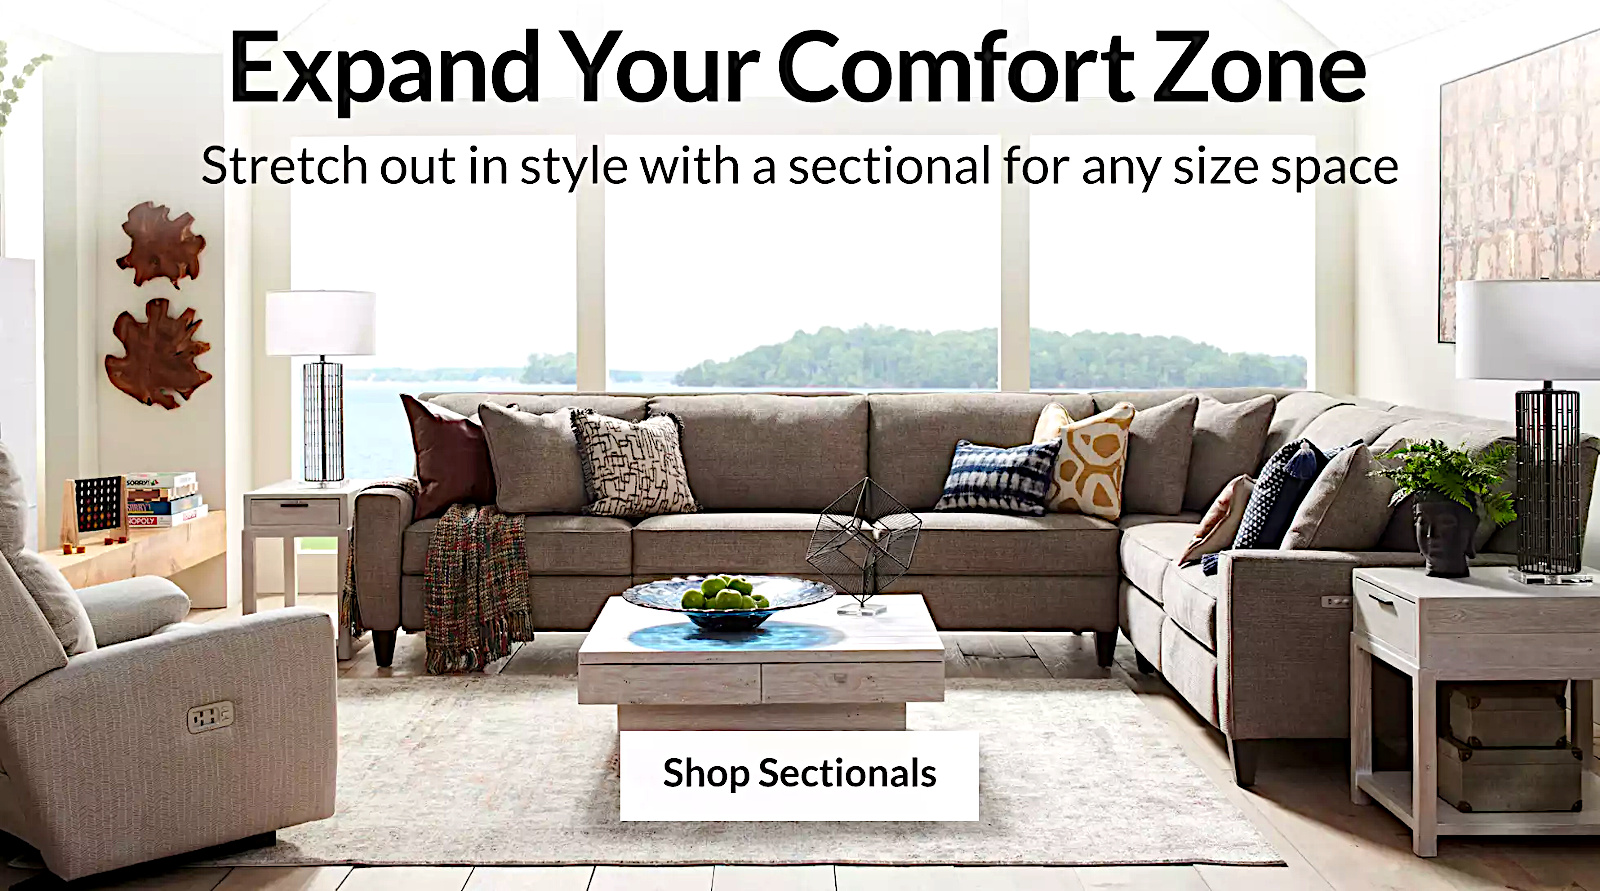 Expand your comfort zone good buy